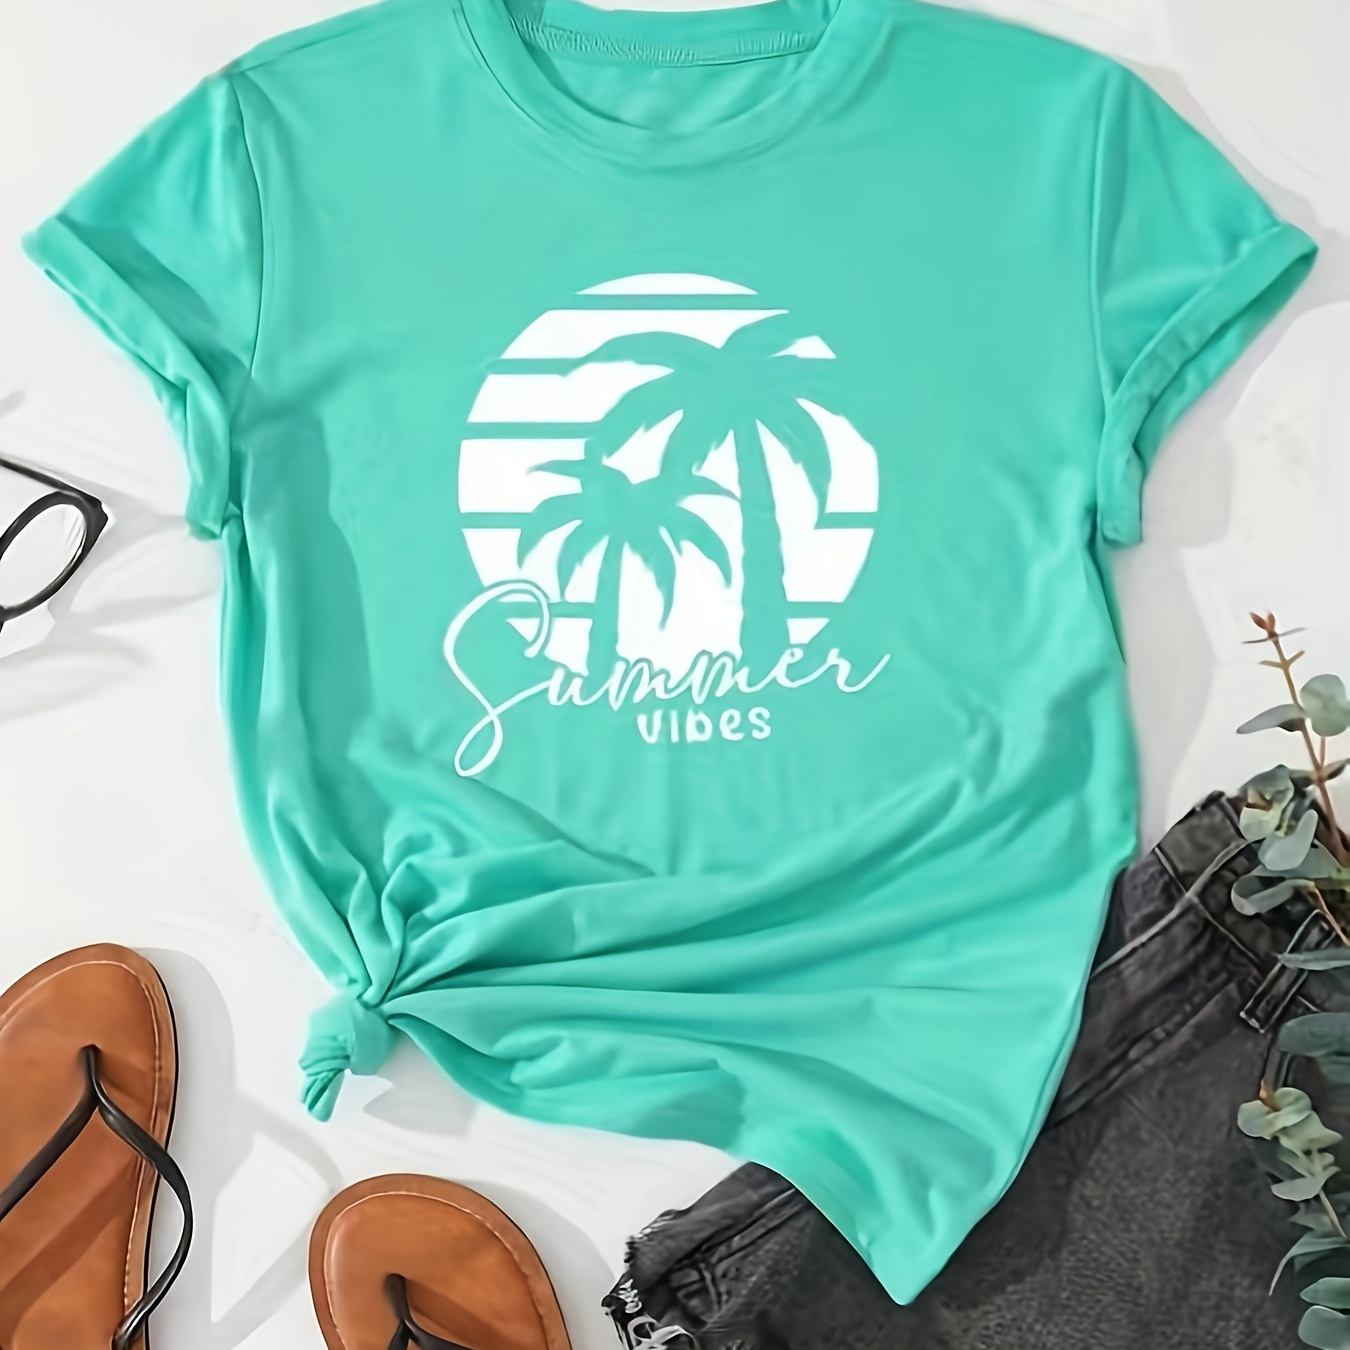 

Coconut Tree Print Crew Neck T-shirt, Short Sleeve Casual Top For Spring & Summer, Women's Clothing